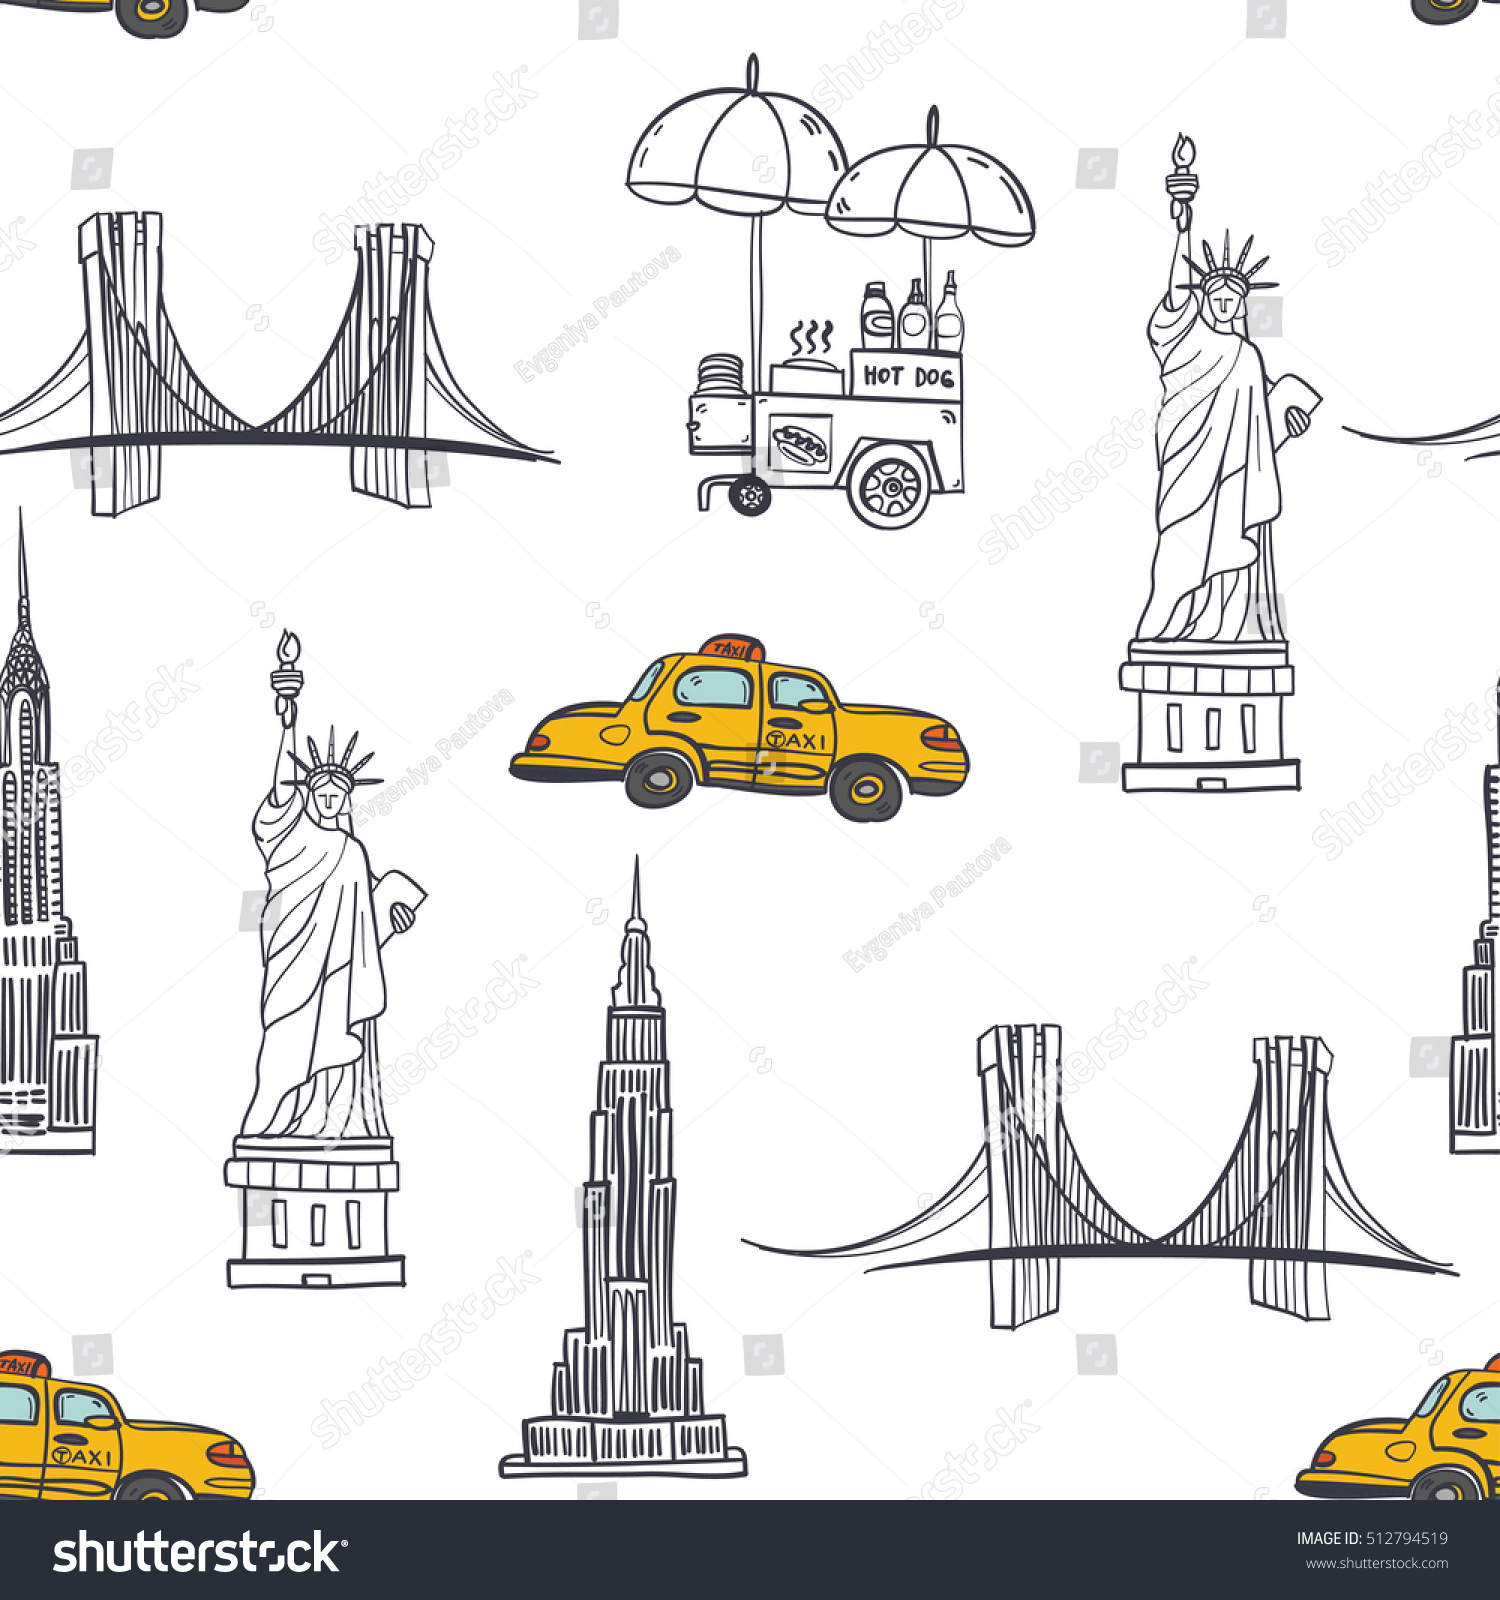 SVG of Hand drawn seamless vector pattern with symbols of New York City, statue of liberty, hot dog stand, Brooklyn bridge, Chrysler building, Empire State Building svg